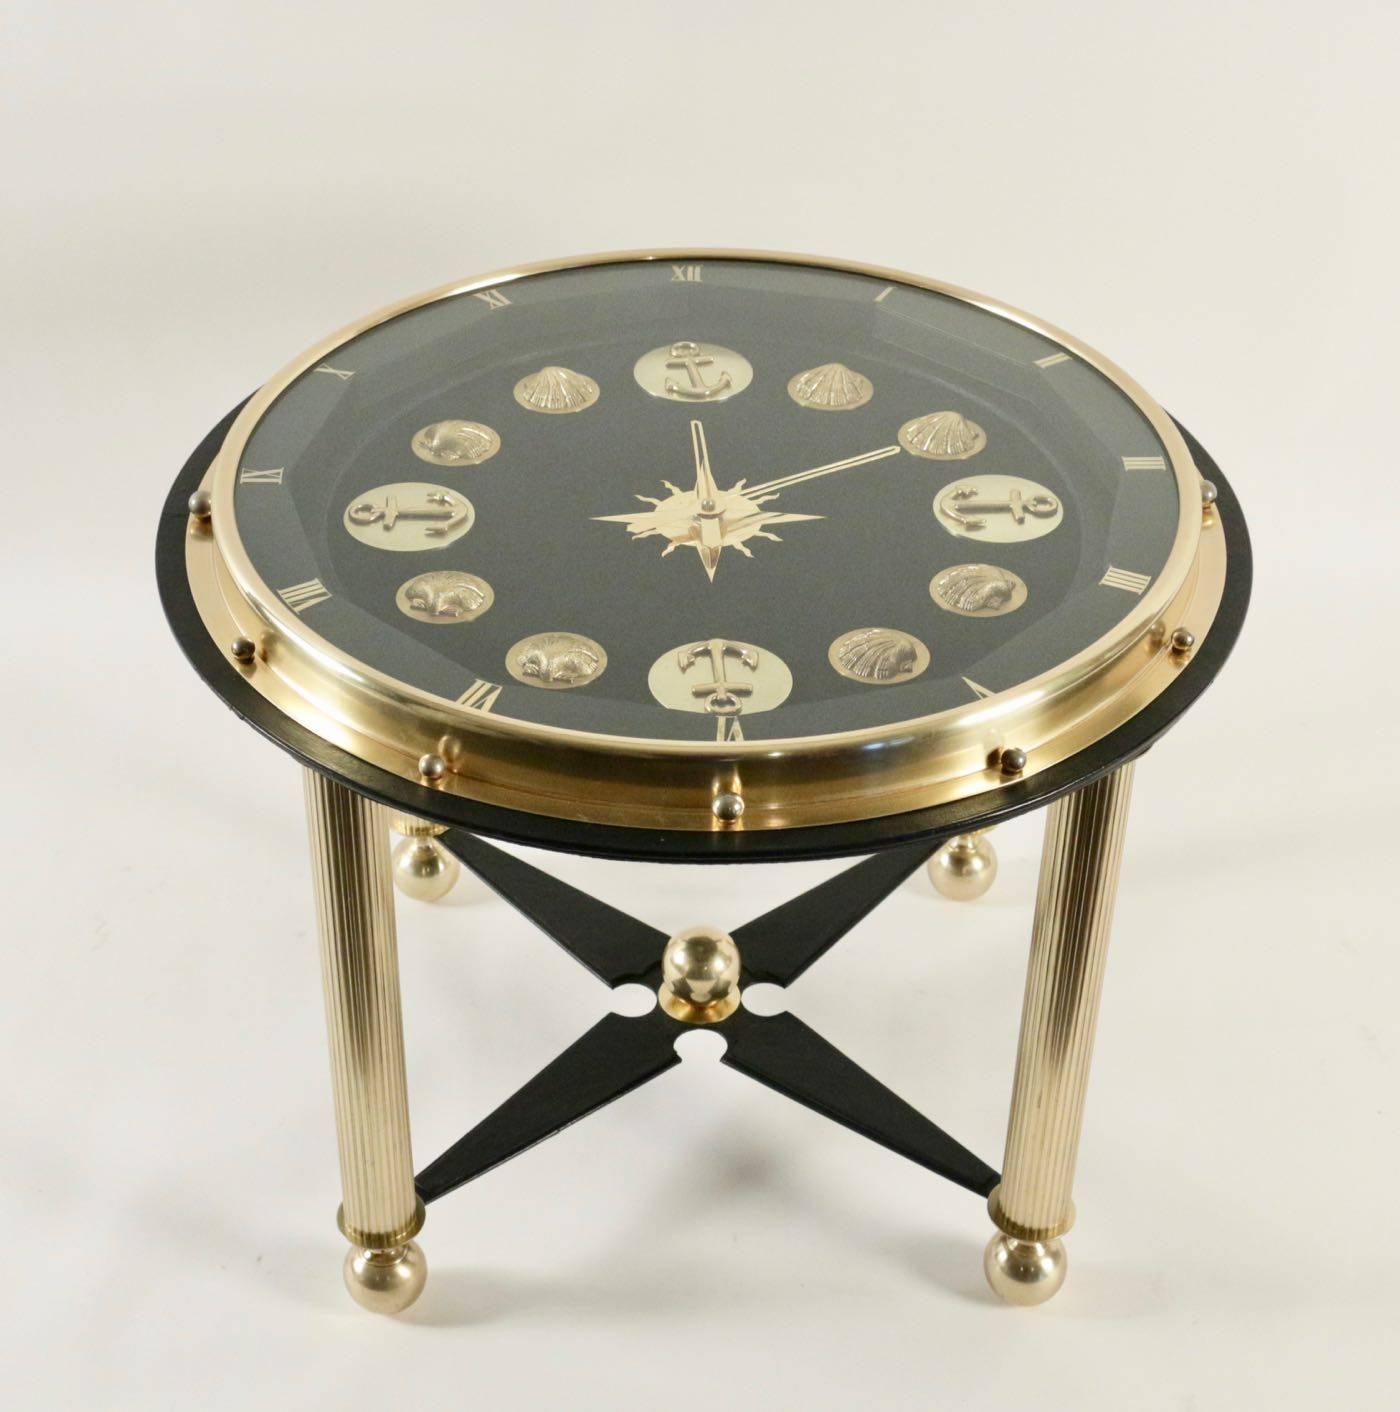 Rare Jacques Adnet Marine clock gueridon. A fancy clock table around the theme of the Sea or Côte d’Azur.
The plate which is also the whole of the clock is decorated with ancors and scallops shell. The clock mecanisme works with 15 jewels